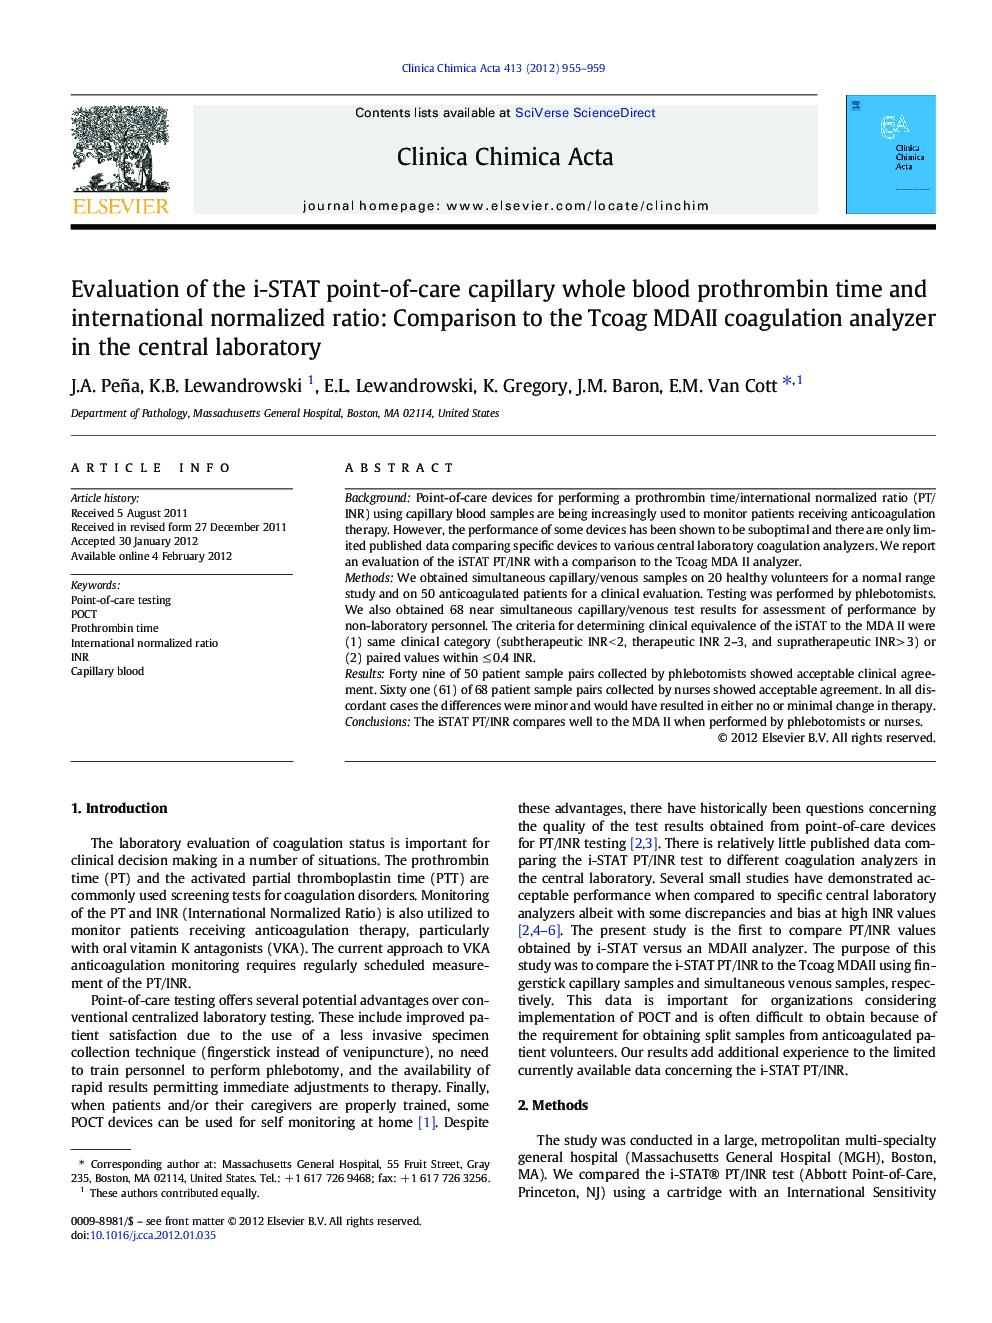 Evaluation of the i-STAT point-of-care capillary whole blood prothrombin time and international normalized ratio: Comparison to the Tcoag MDAII coagulation analyzer in the central laboratory